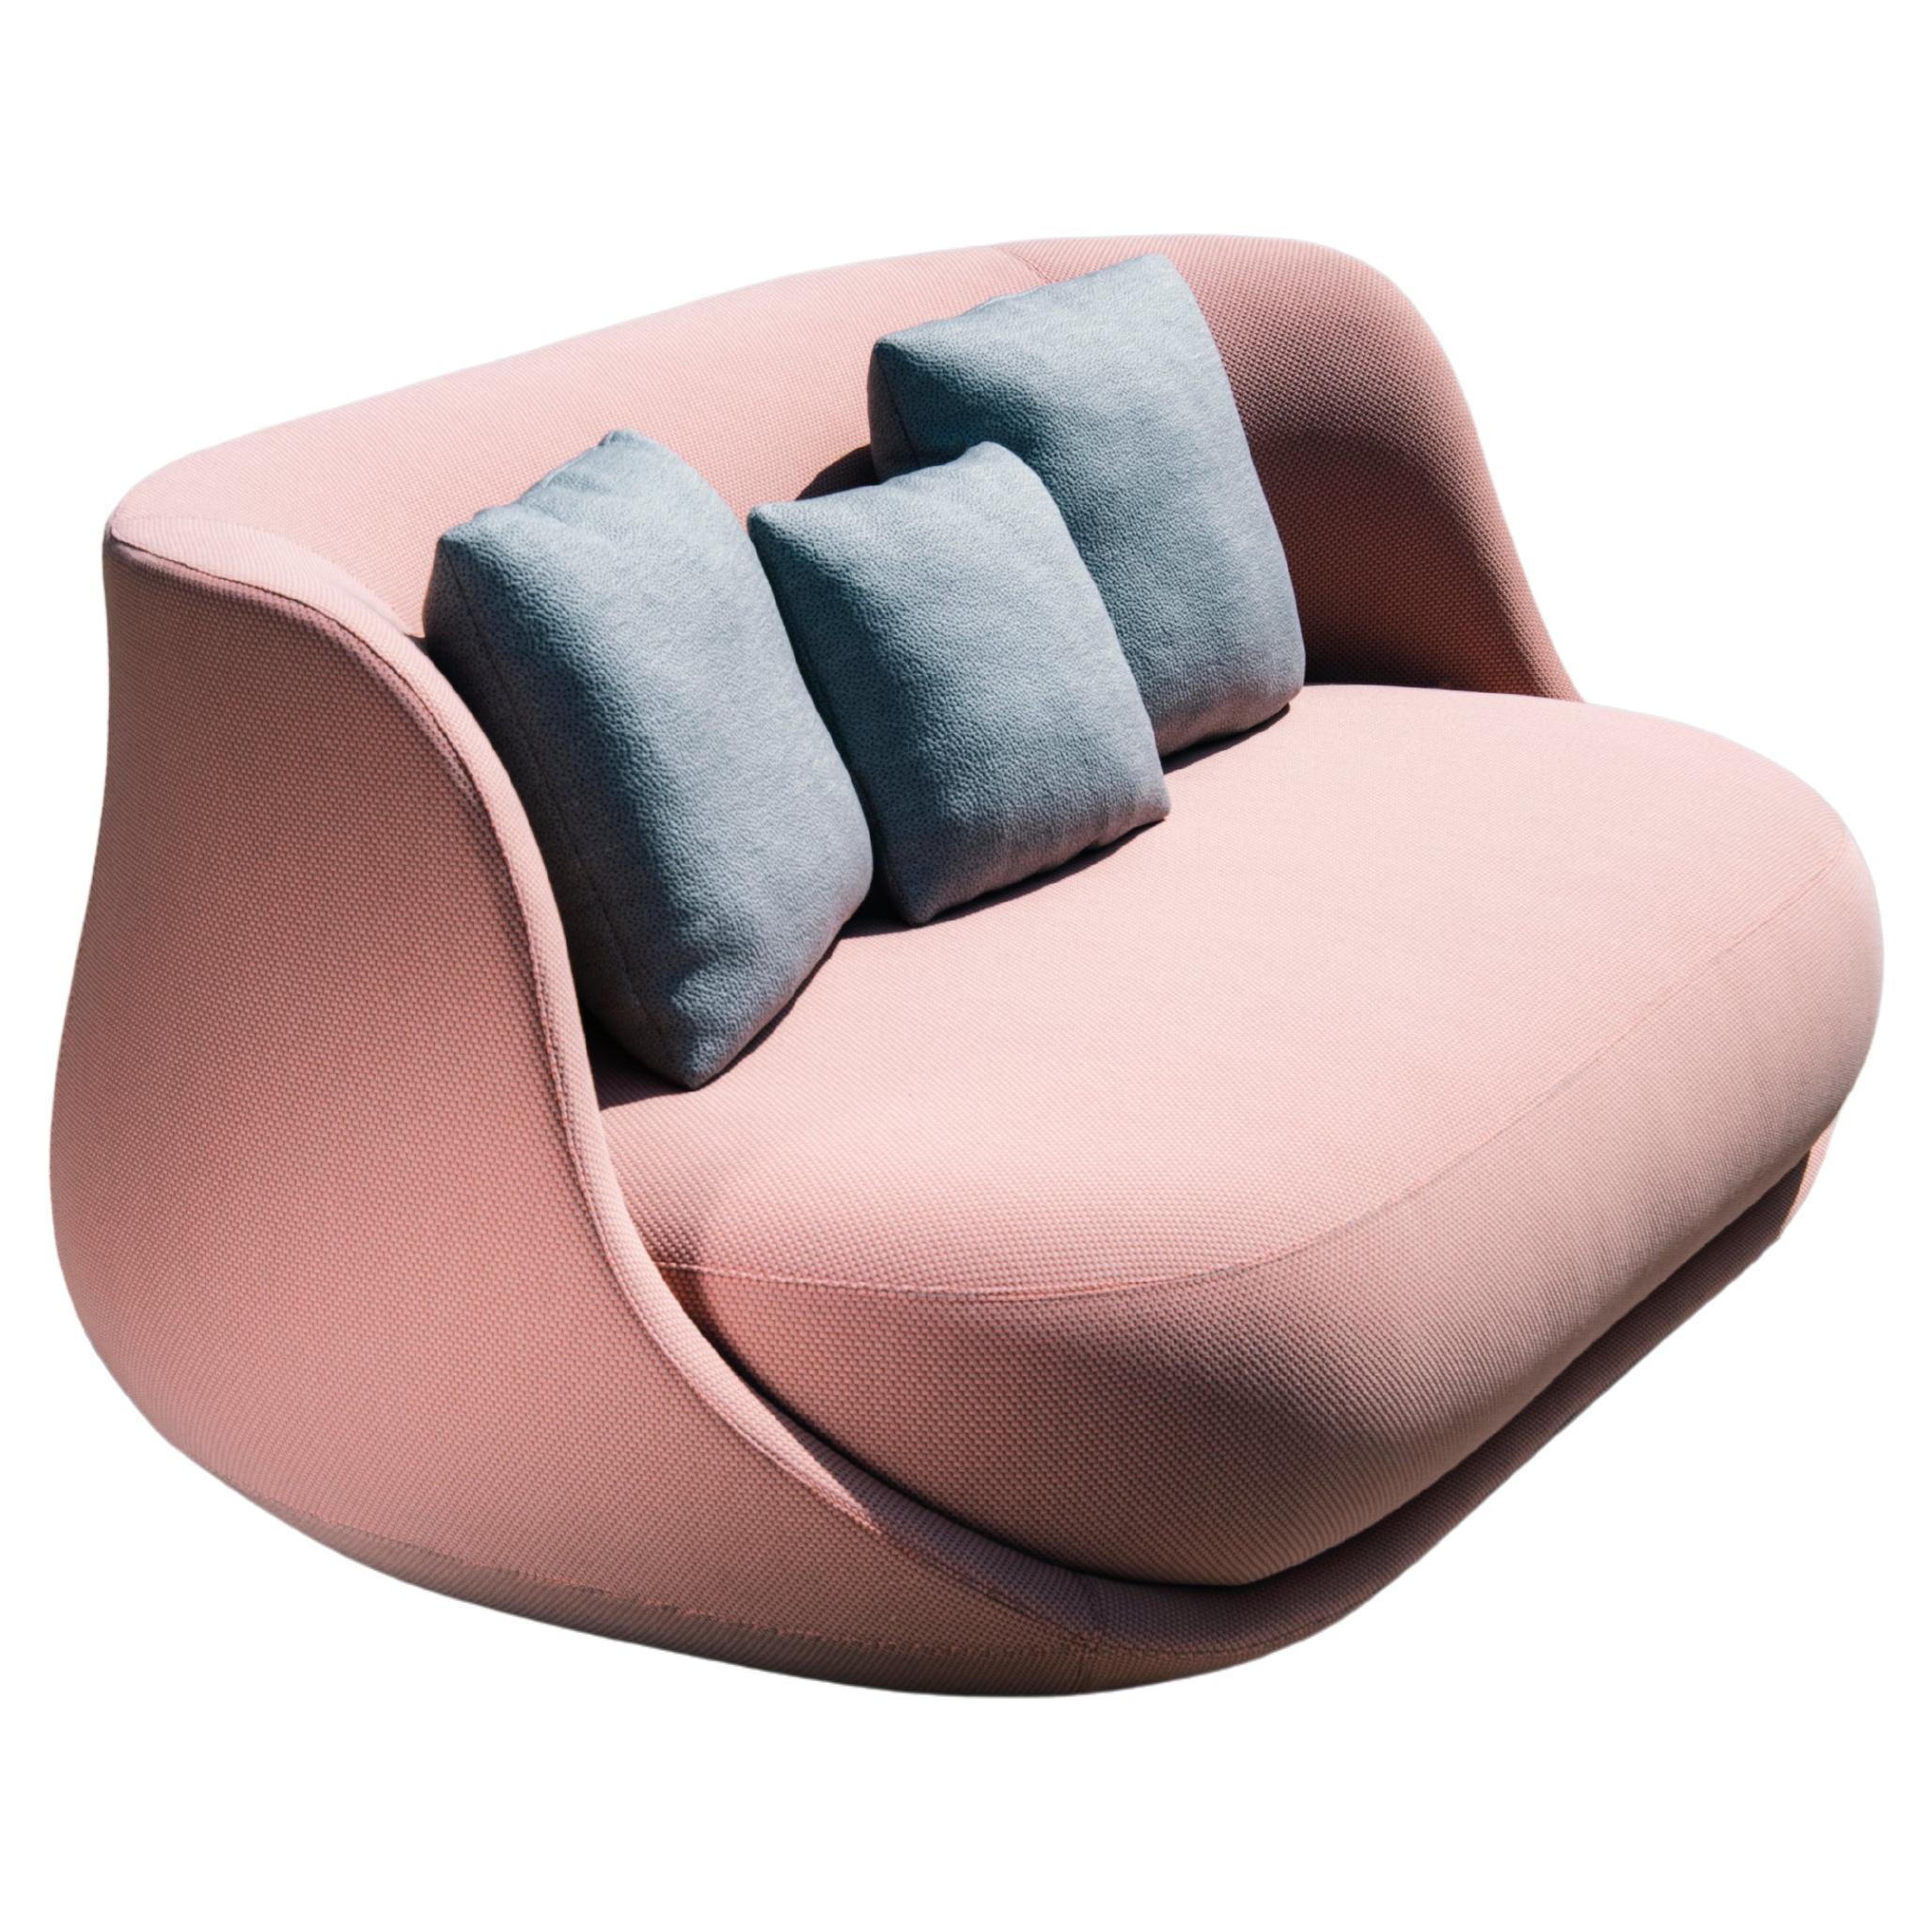 Cushions included in the price.
Liaison is the story of a bold shape, a shell designed to shelter a soft seating cocoon. With generous proportions and an inviting look, can count on the support of a well-defined, meticulously designed and distinctly